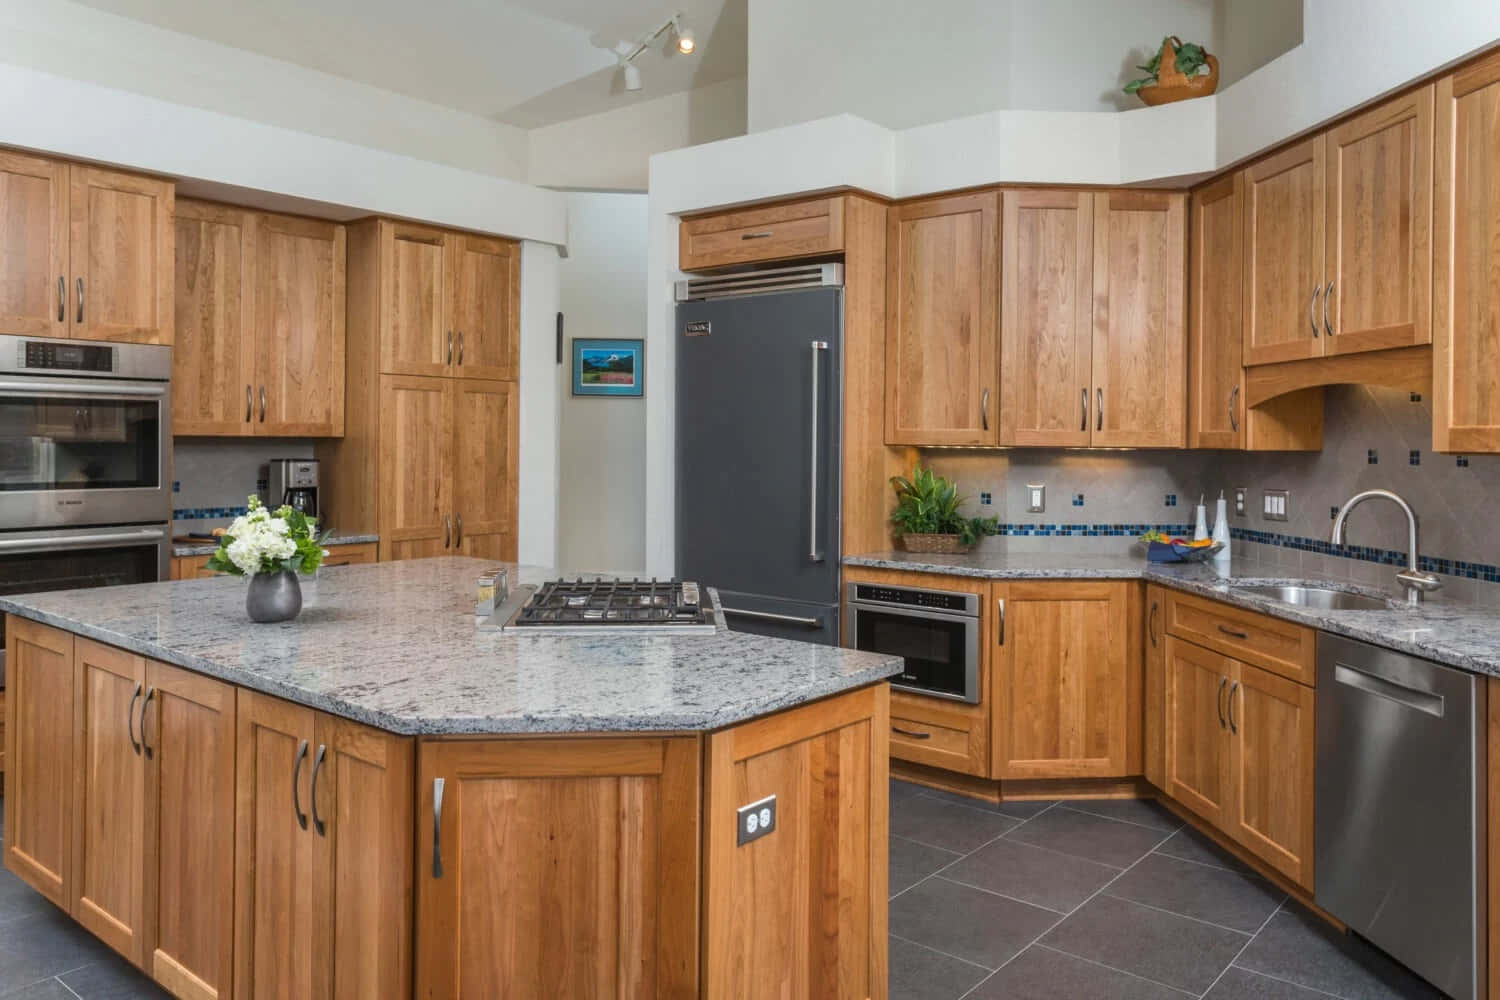 A Kitchen With Wood Cabinets And Granite Counter Tops